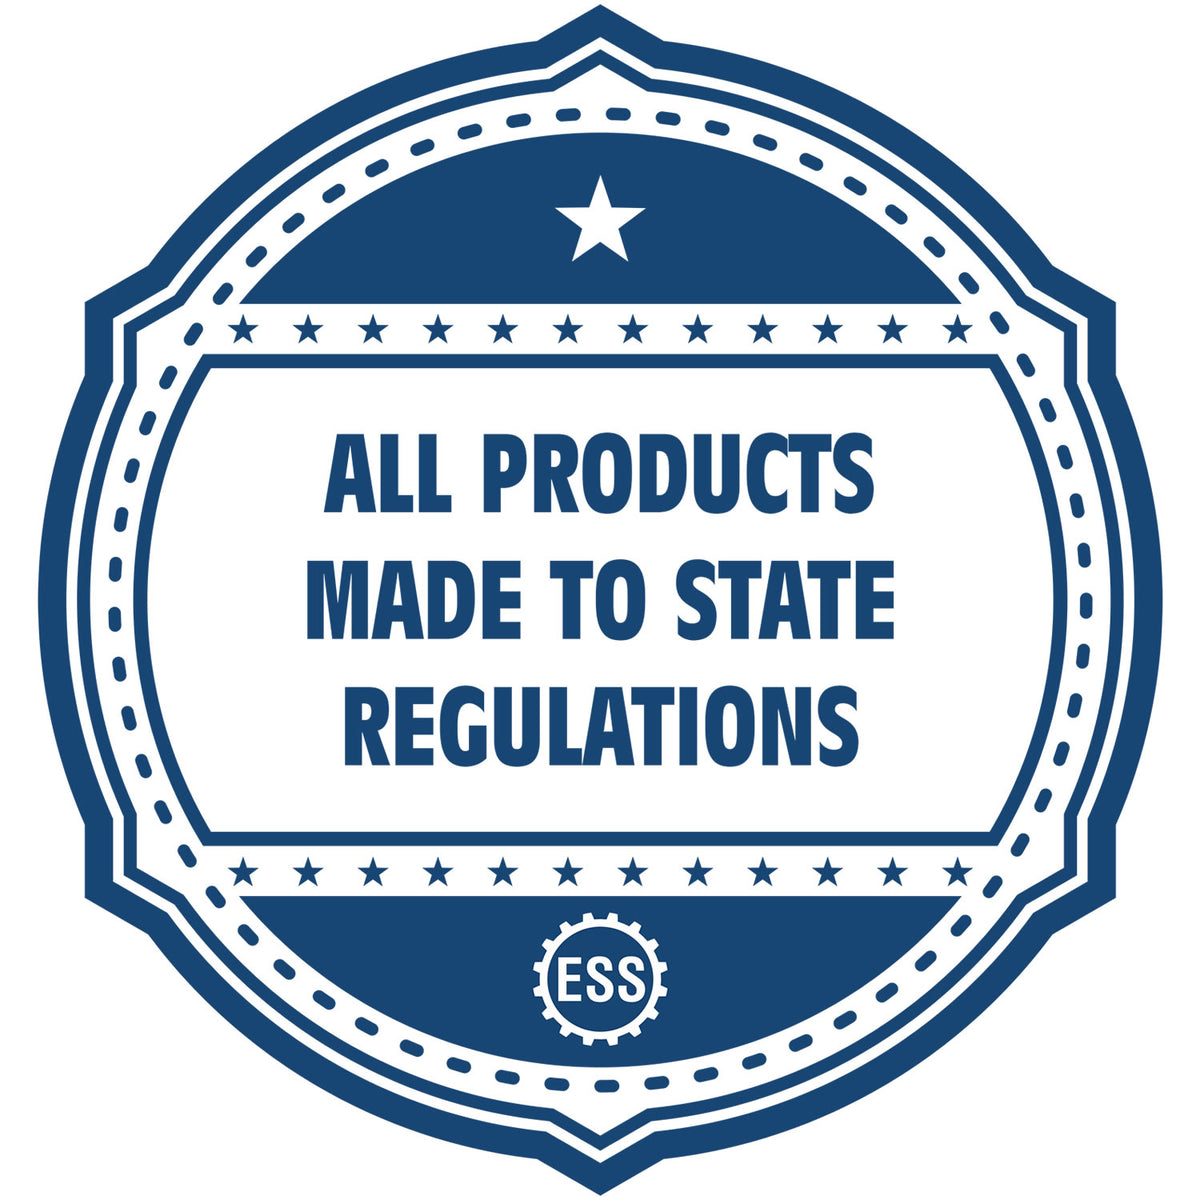 A blue icon or badge for the Gift Kansas Engineer Seal showing that this product is made in compliance with state regulations.